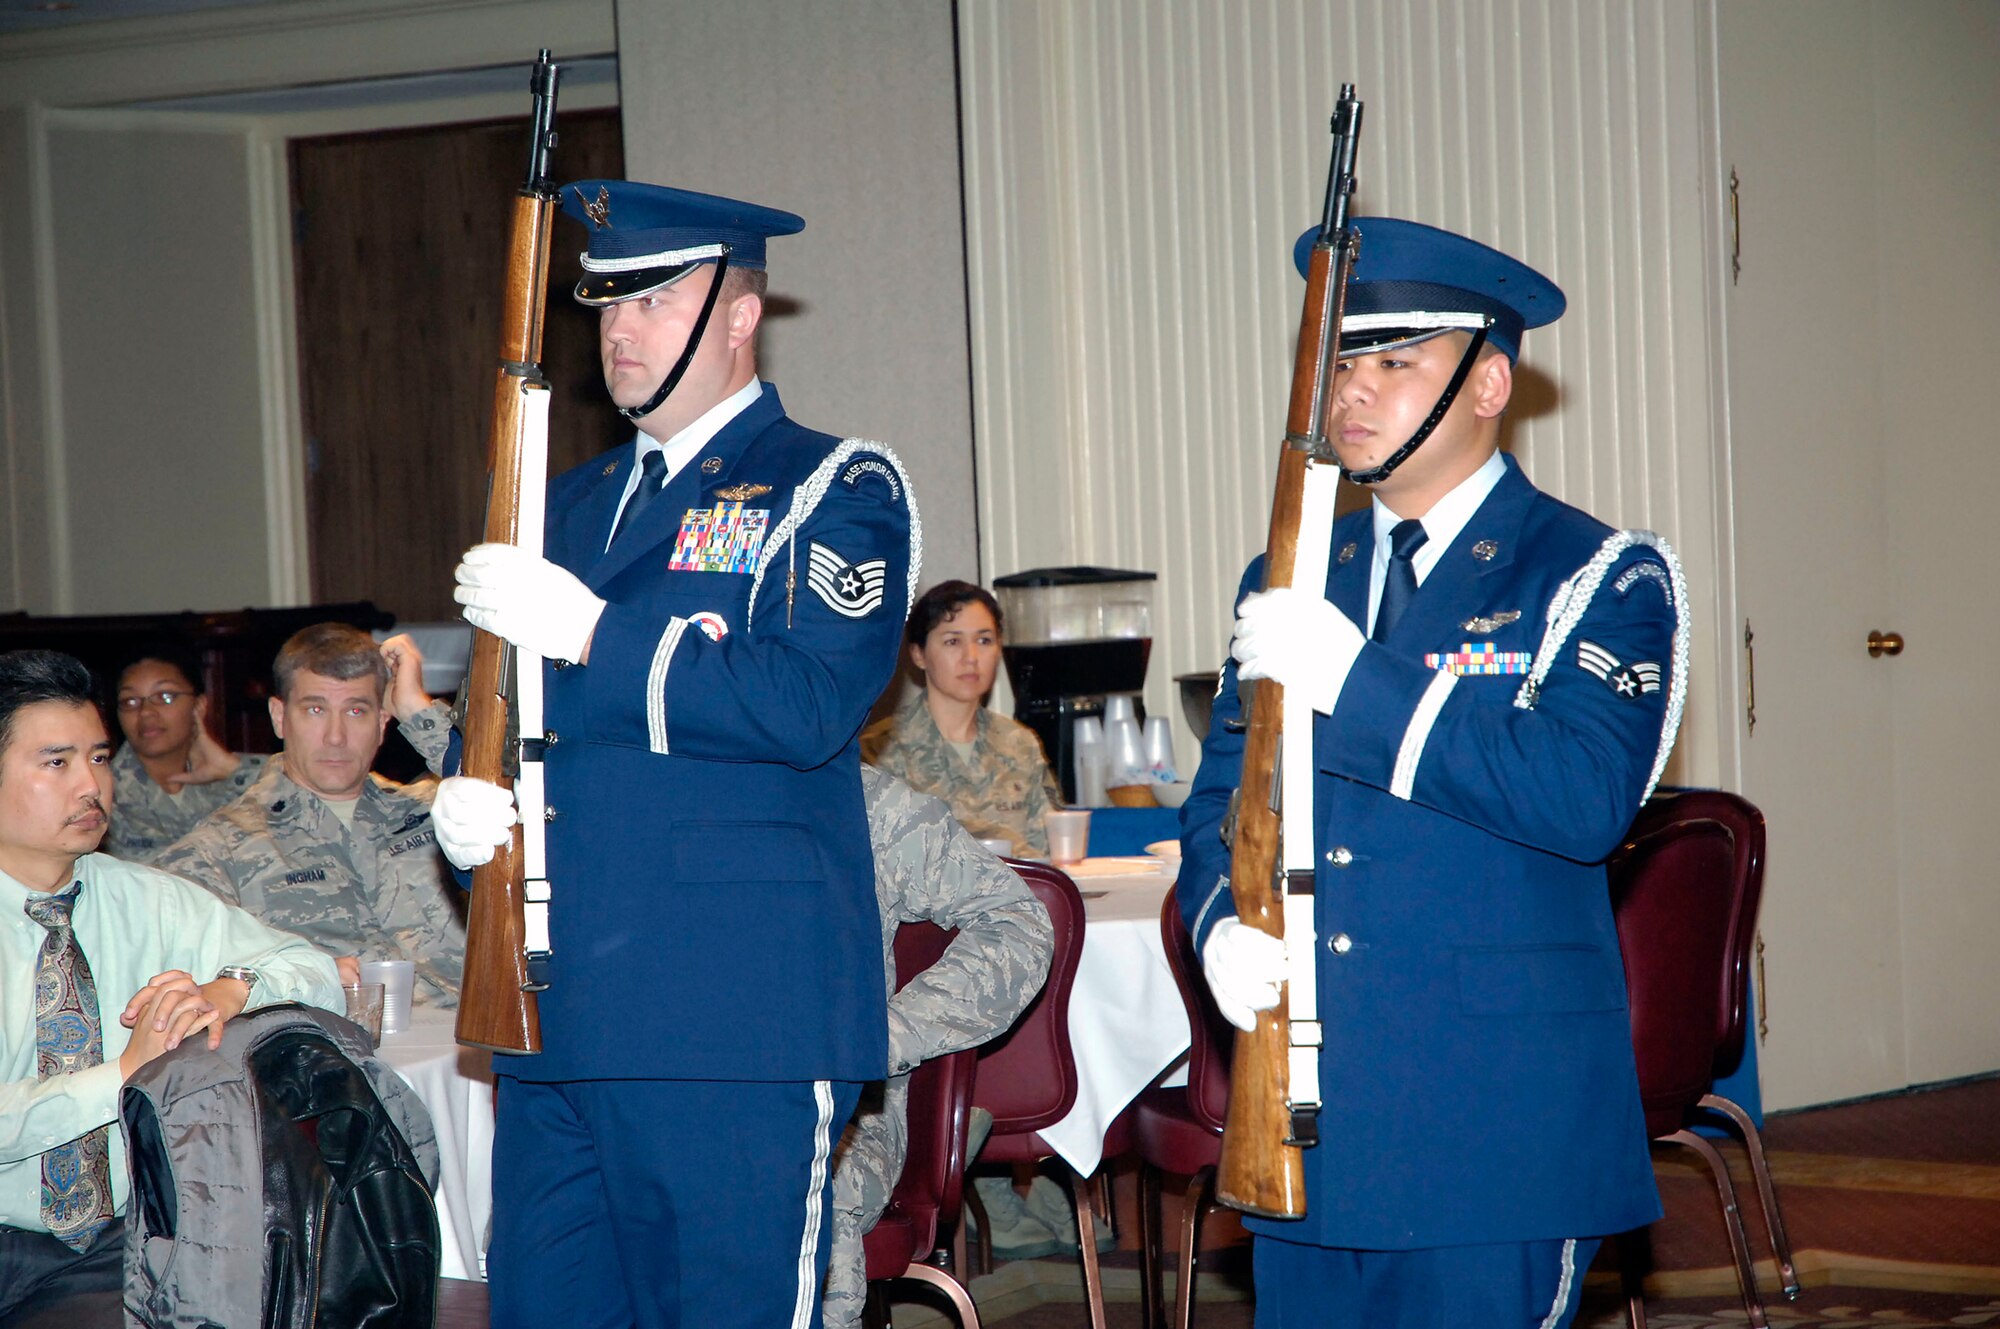 Members of Team Tinker recognized the sacrifice of the Base Honor Guard at an appreciation ceremony Oct. 30 at the Tinker Club. Tech. Sgt. Patrick Heston, left, and Senior Airman John Paul Aquino were two of the Airmen who performed at the event.